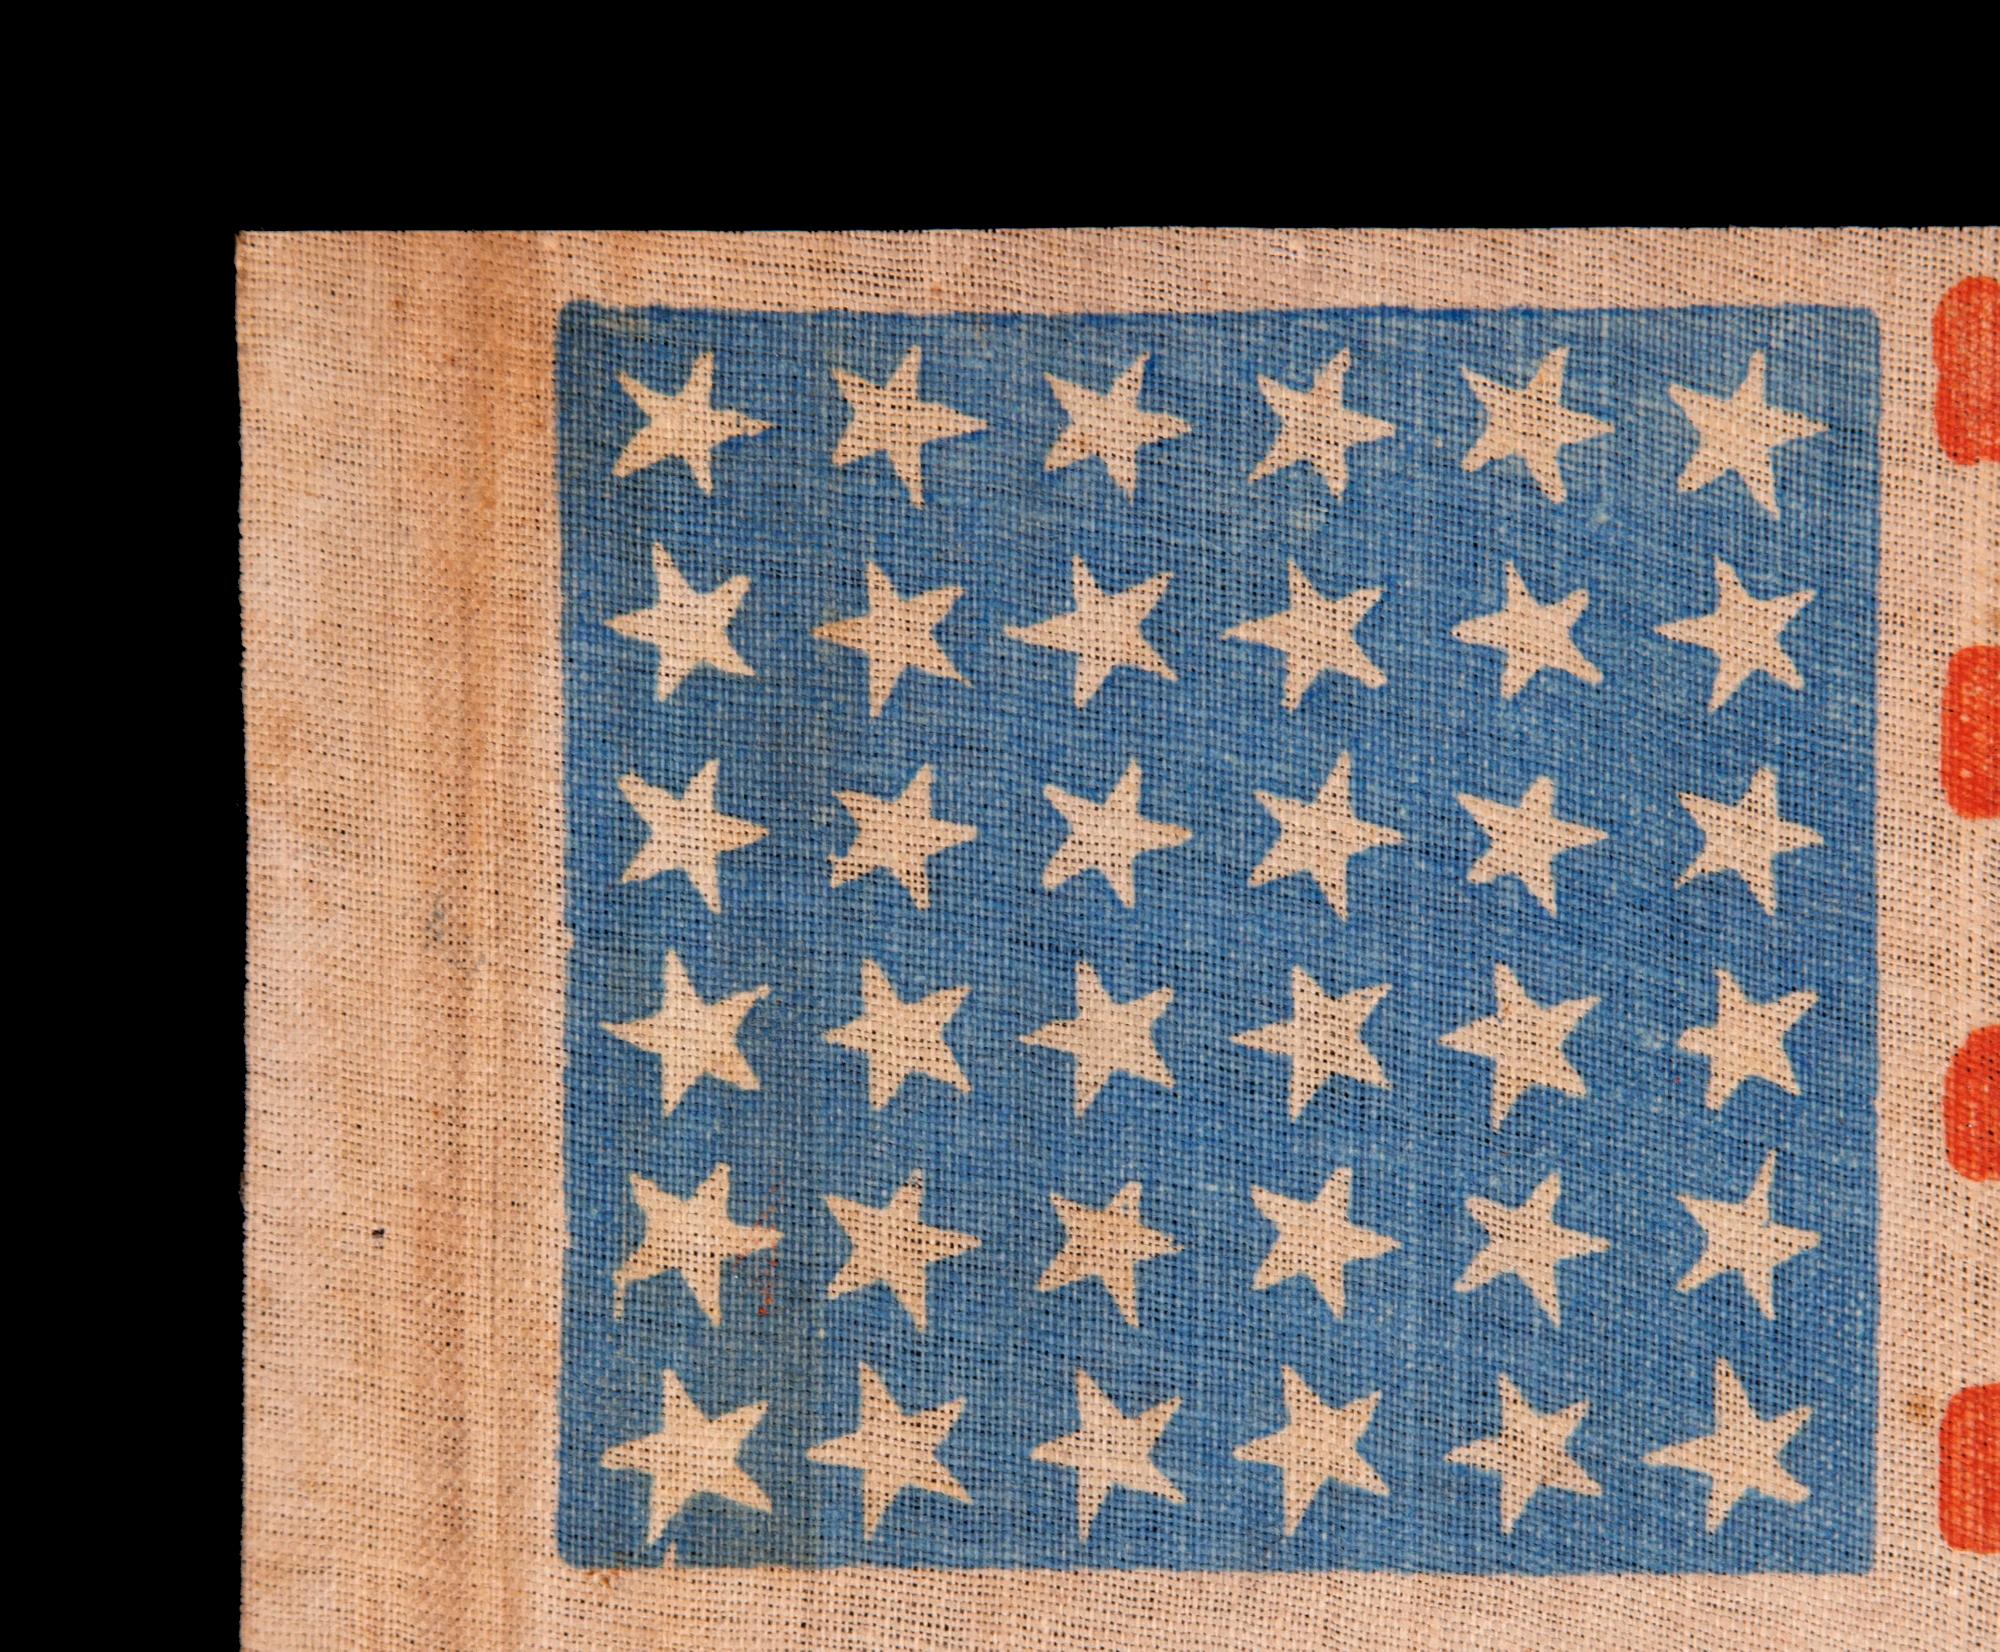 36 STAR ANTIQUE AMERICAN PARADE FLAG WITH CANTED STARS IN DANCING ROWS, ON A BEAUTIFUL, CORNFLOWER BLUE CANTON; CIVIL WAR ERA, NEVADA STATEHOOD, 1864-1867

36 star antique American flag, printed on coarse, glazed cotton. The stars are arranged in